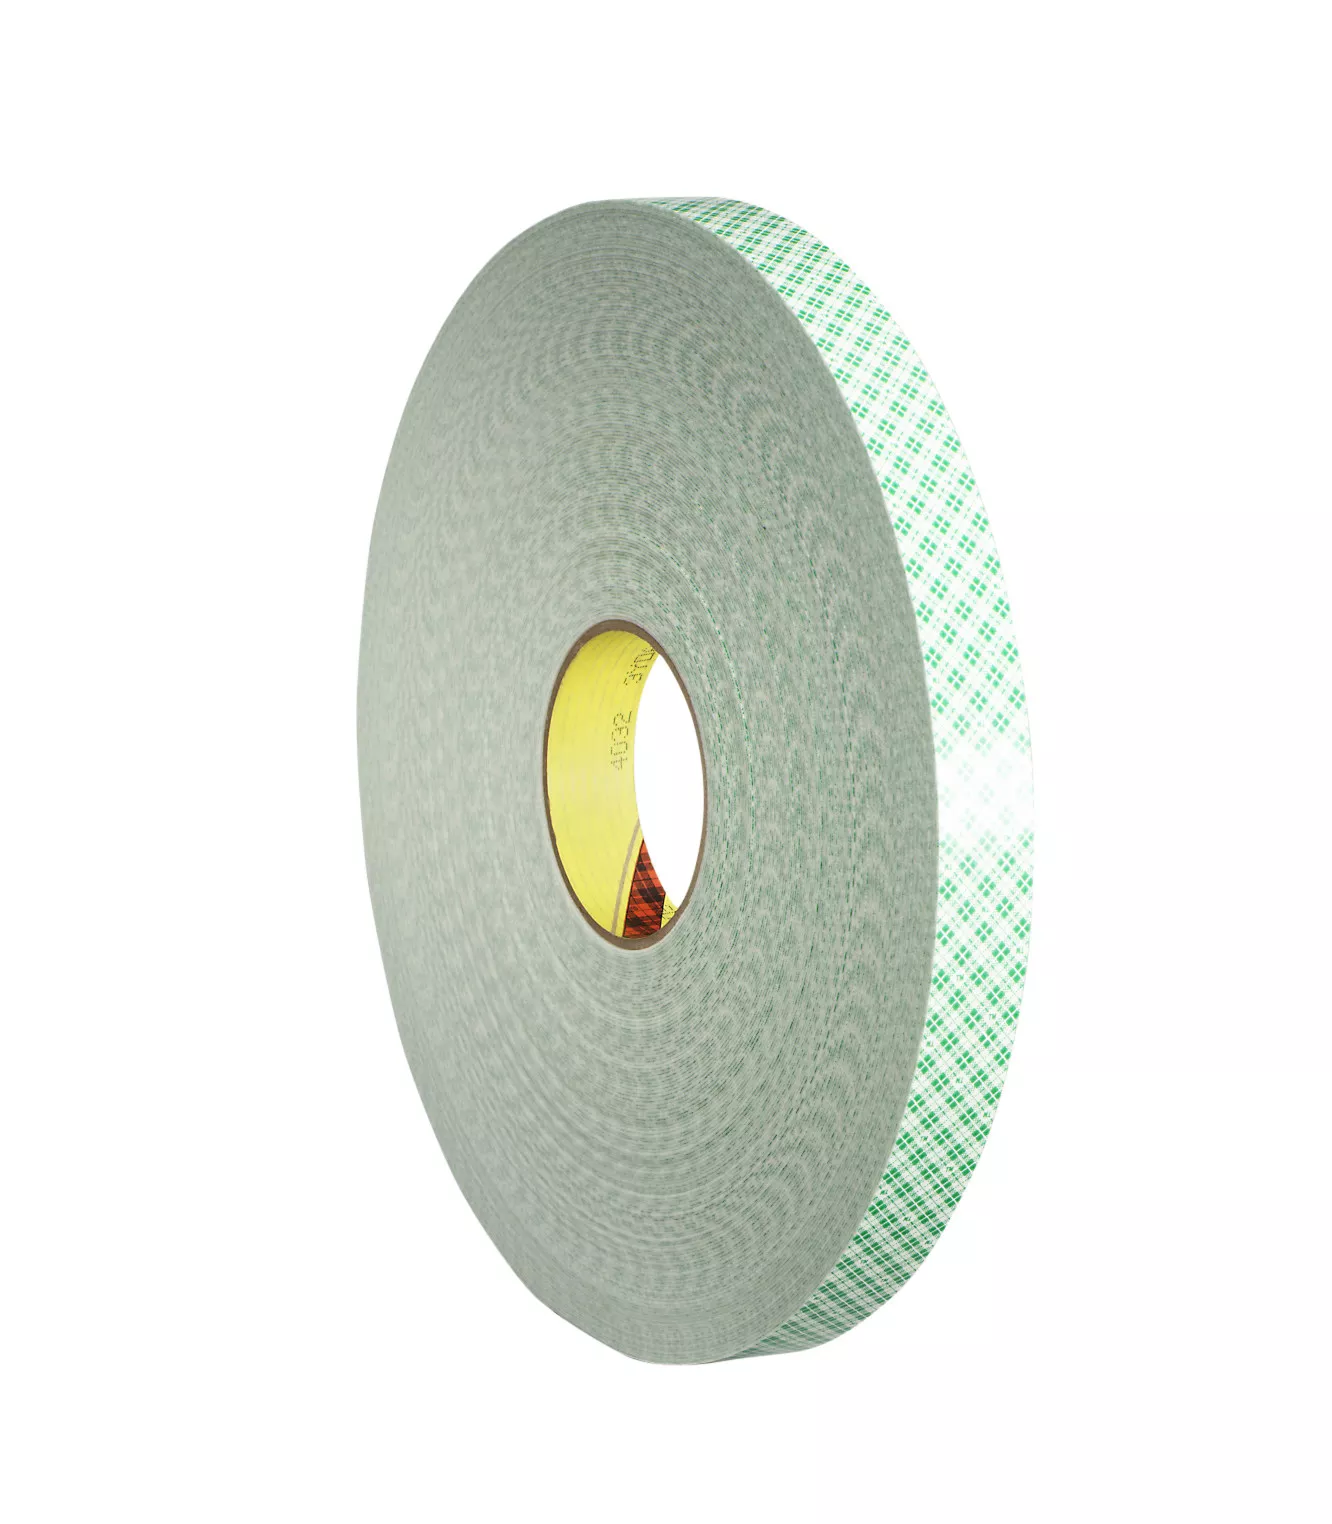 3M™ Double Coated Urethane Foam Tape 4032, Off White, 1 in x 72 yd, 31
mil, 9 Rolls/Case